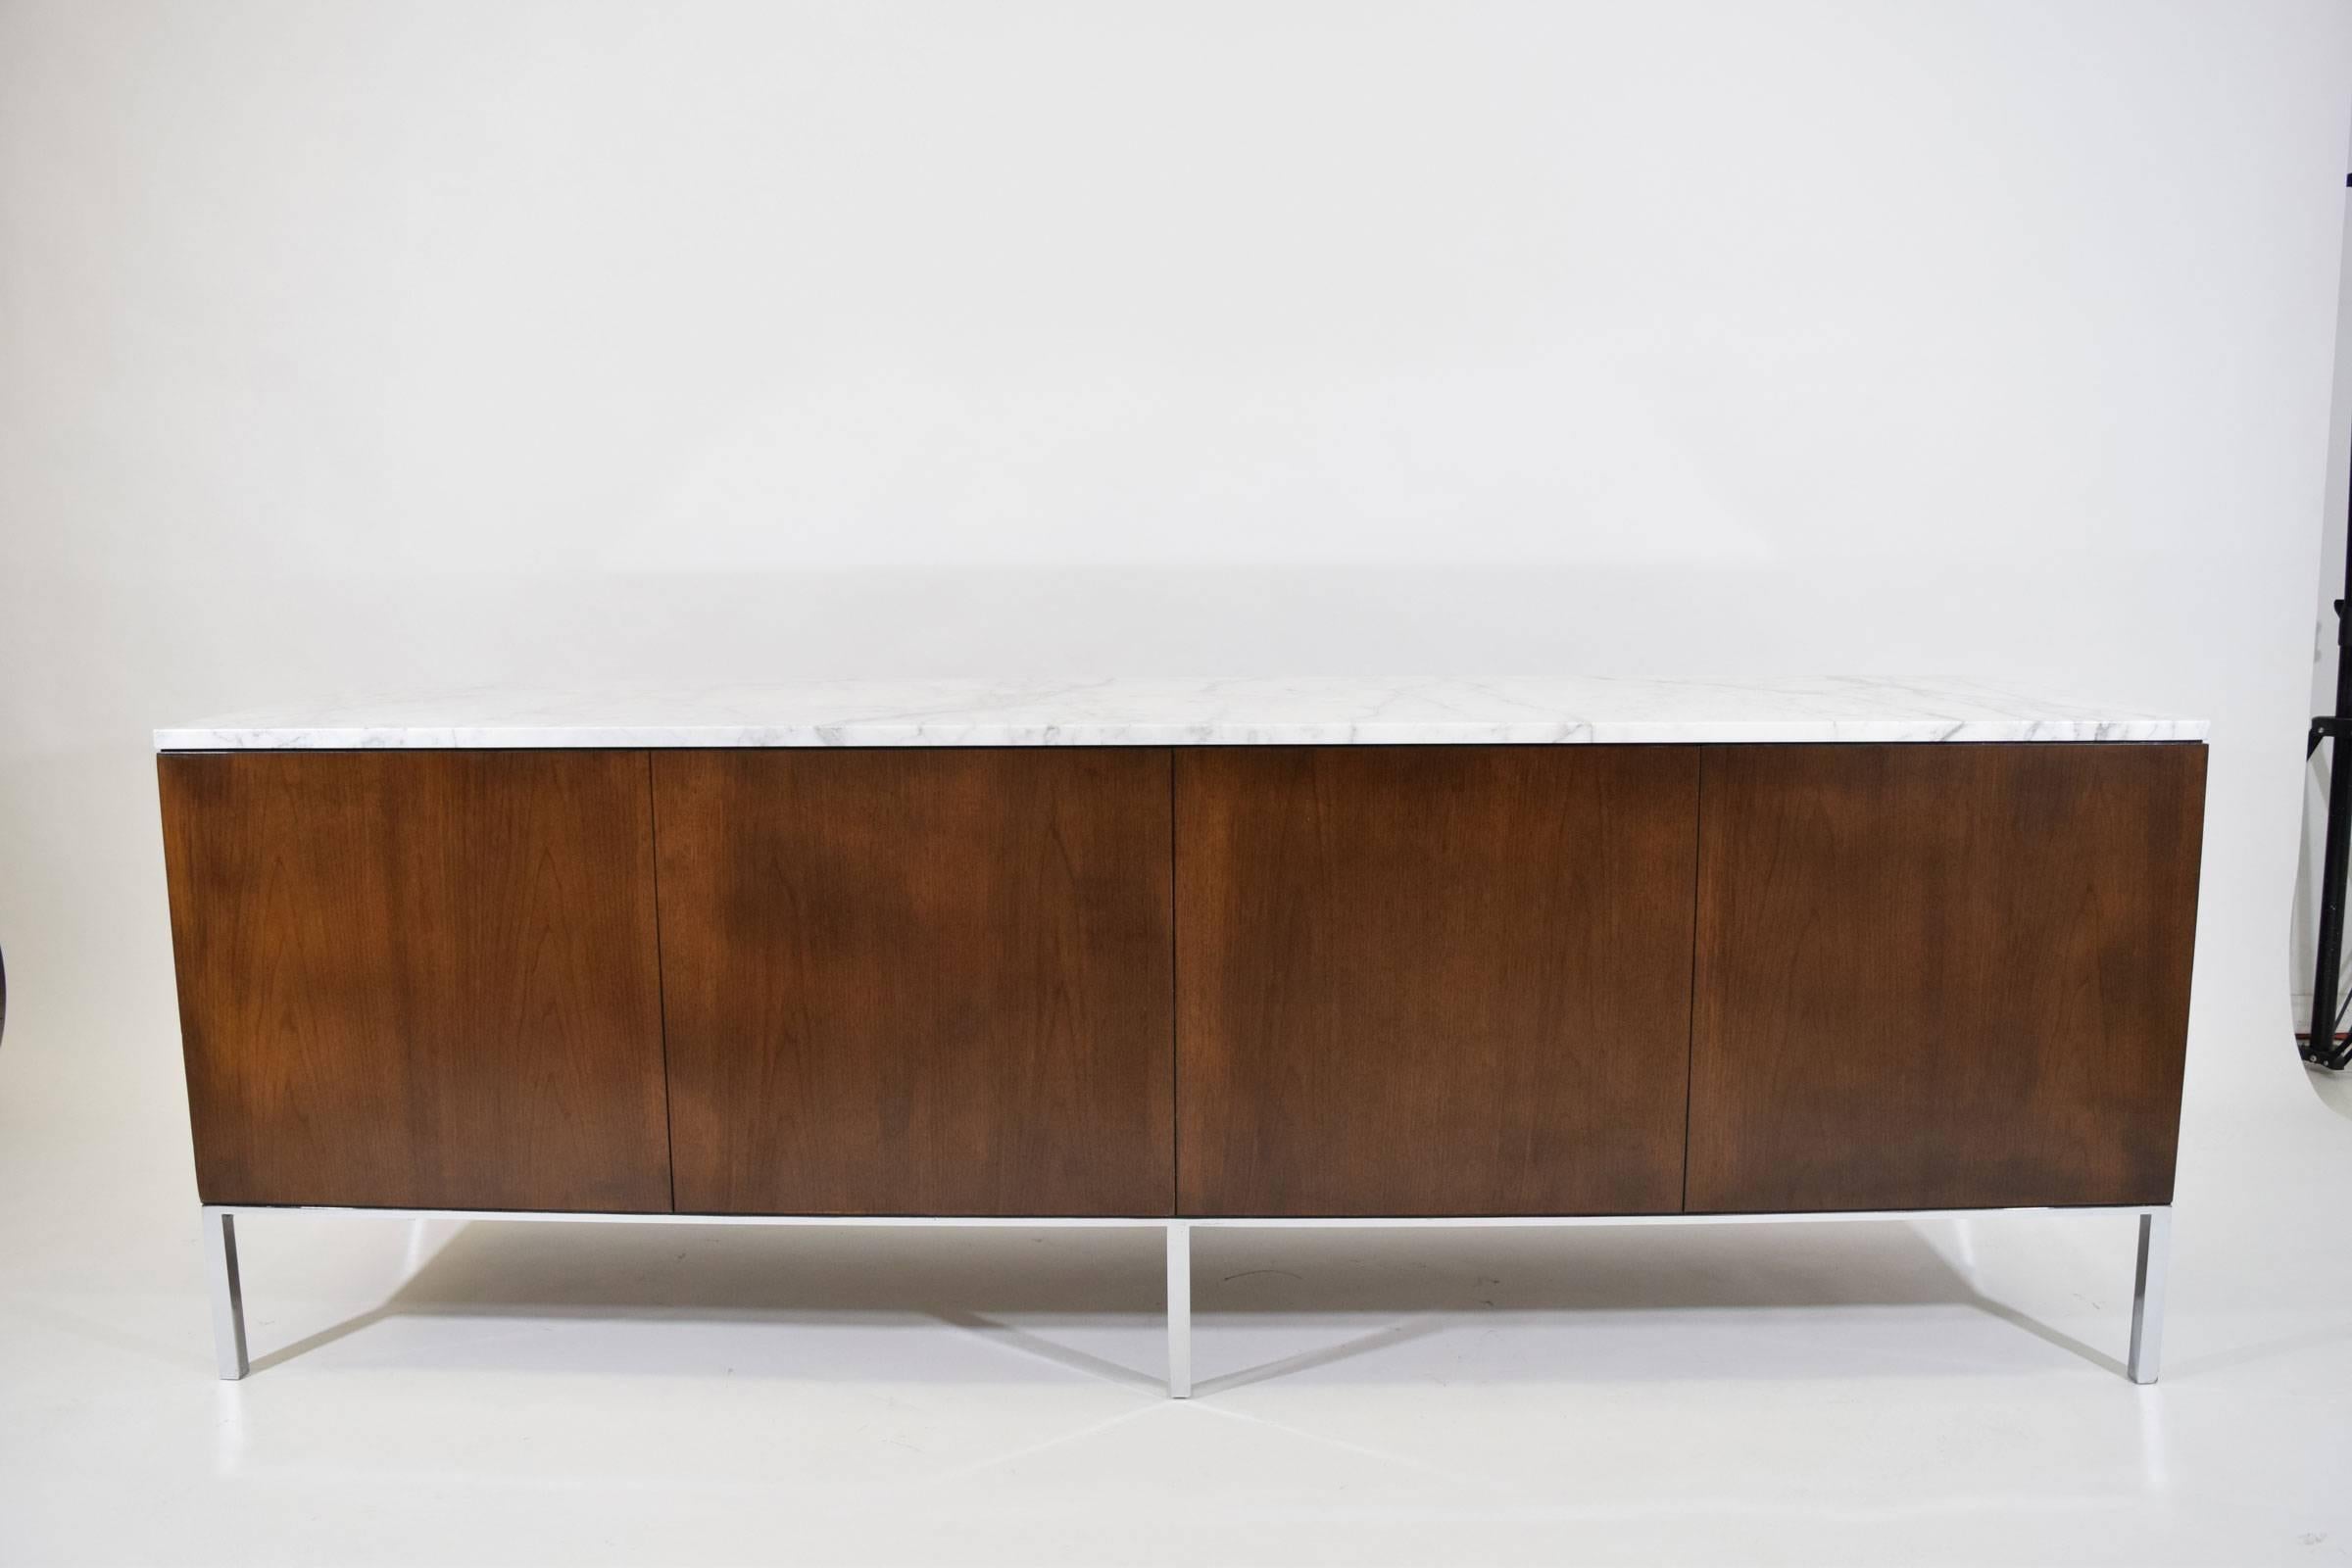 This is an early Florence Knoll credenza. The back is finished so the piece can float if desired. We have restored o the piece is in beautiful condition. Top is Statvario Venato marble. Four sections include three doors with shelves and a set of